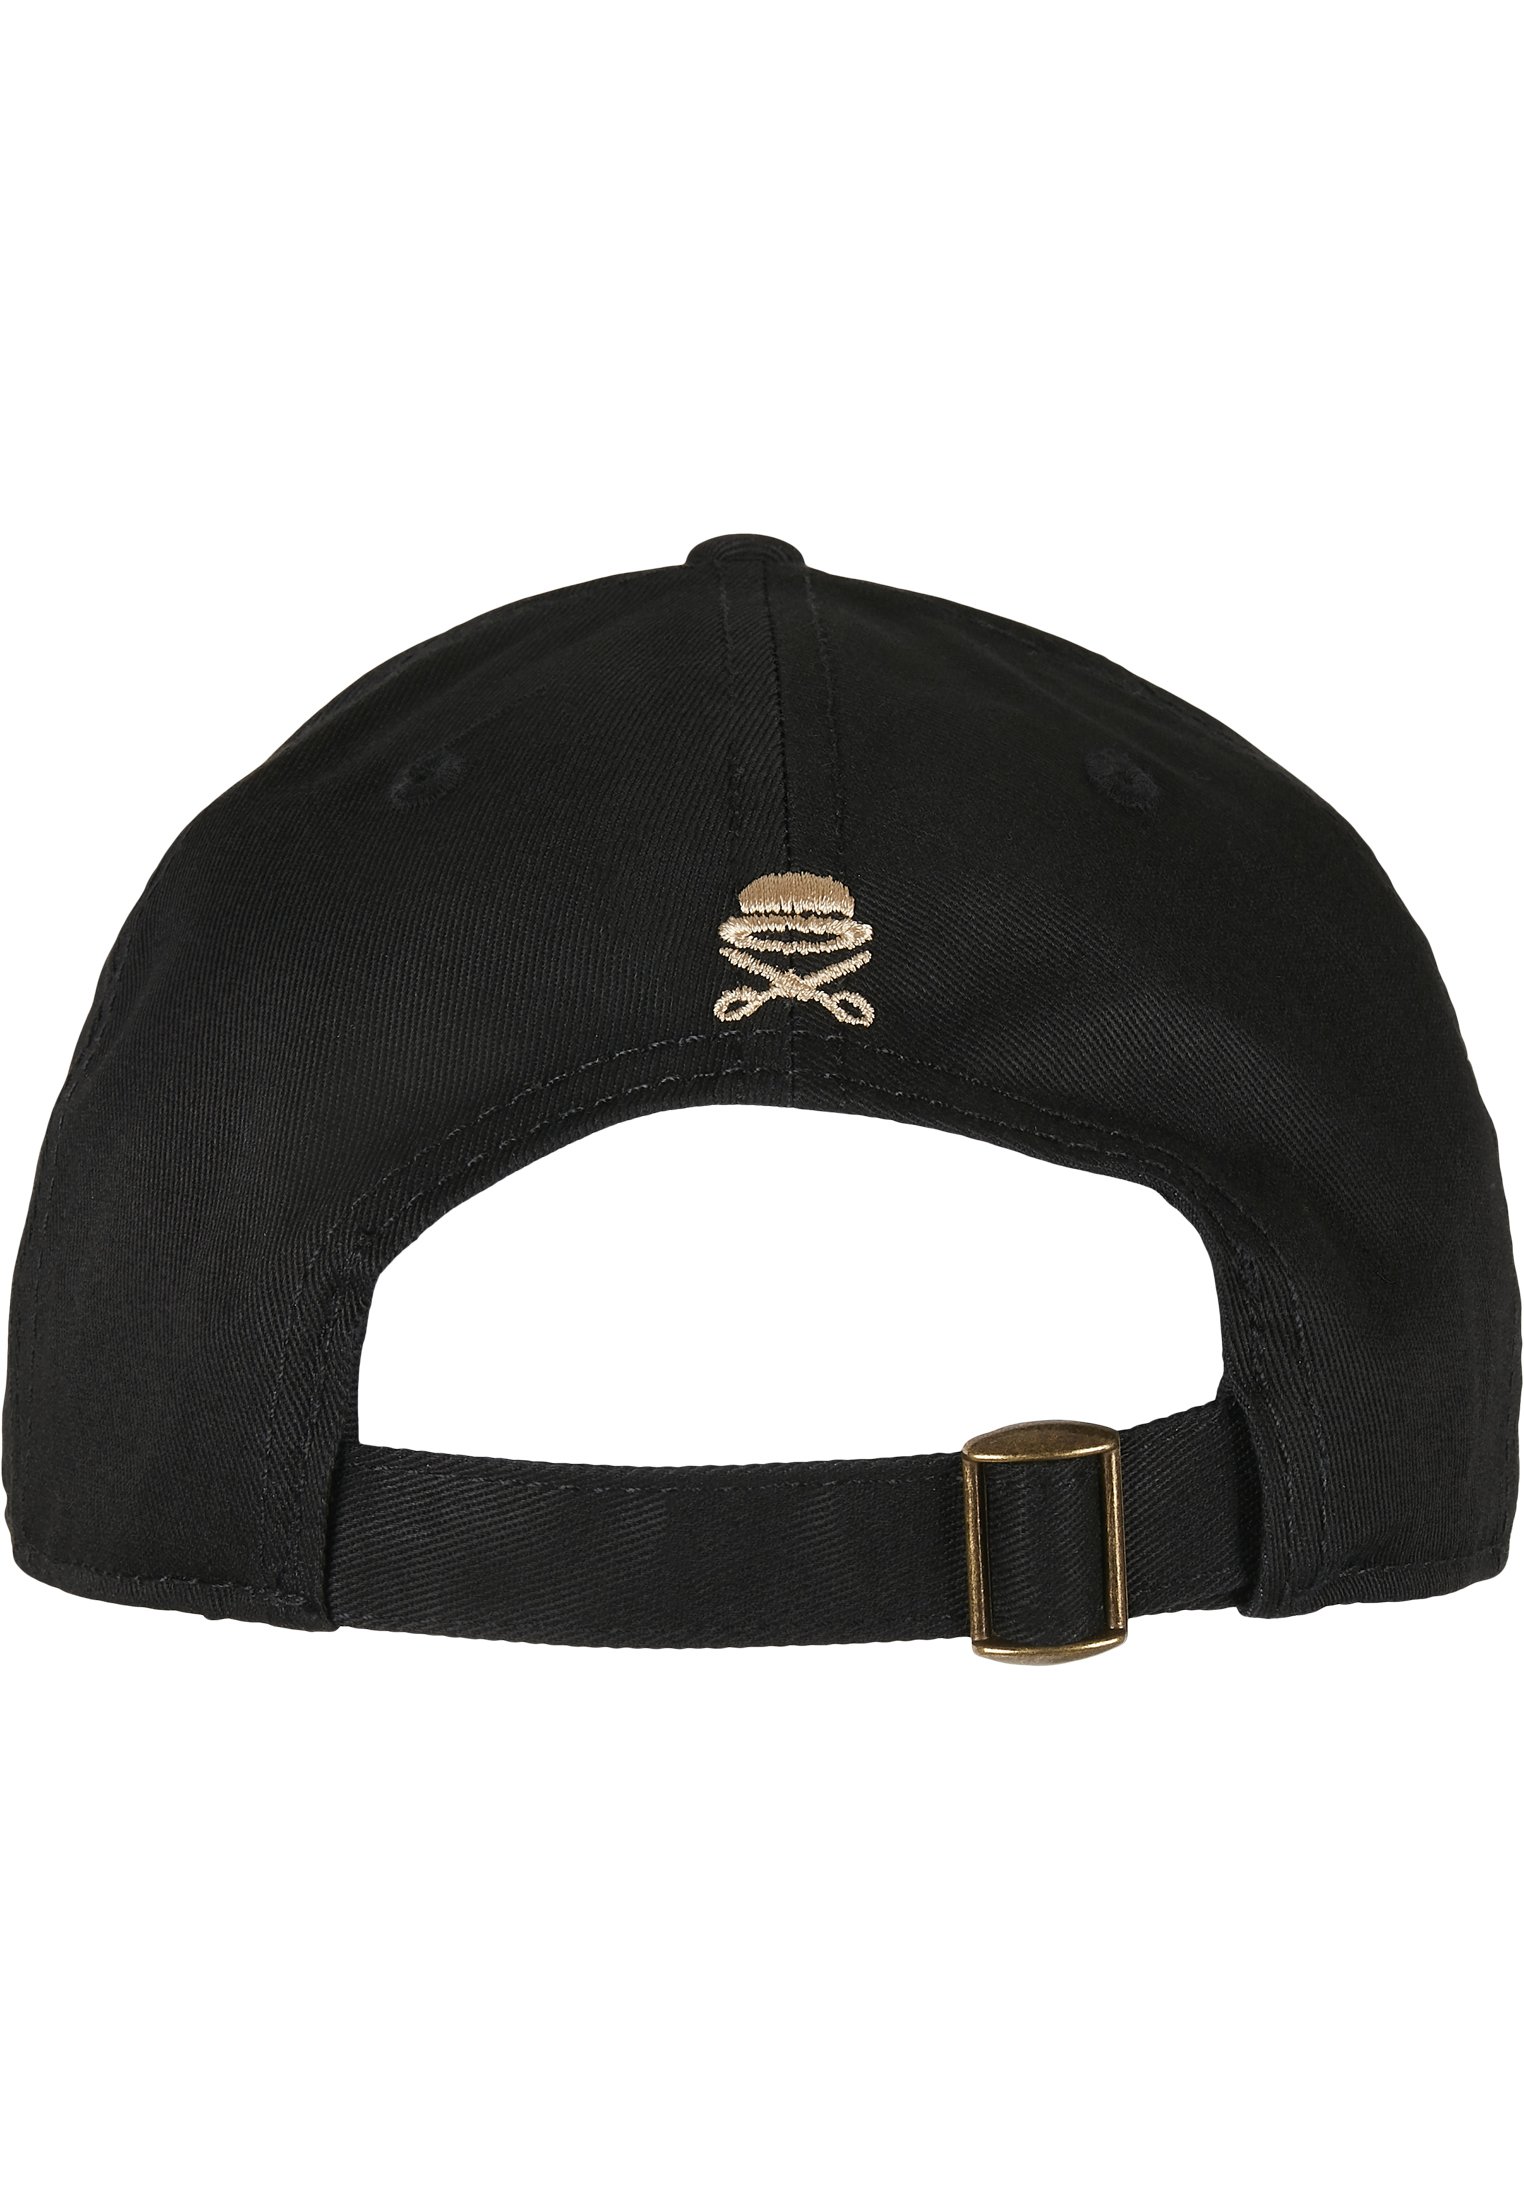 C&S WL Earn Respect Curved Cap black/mc one size